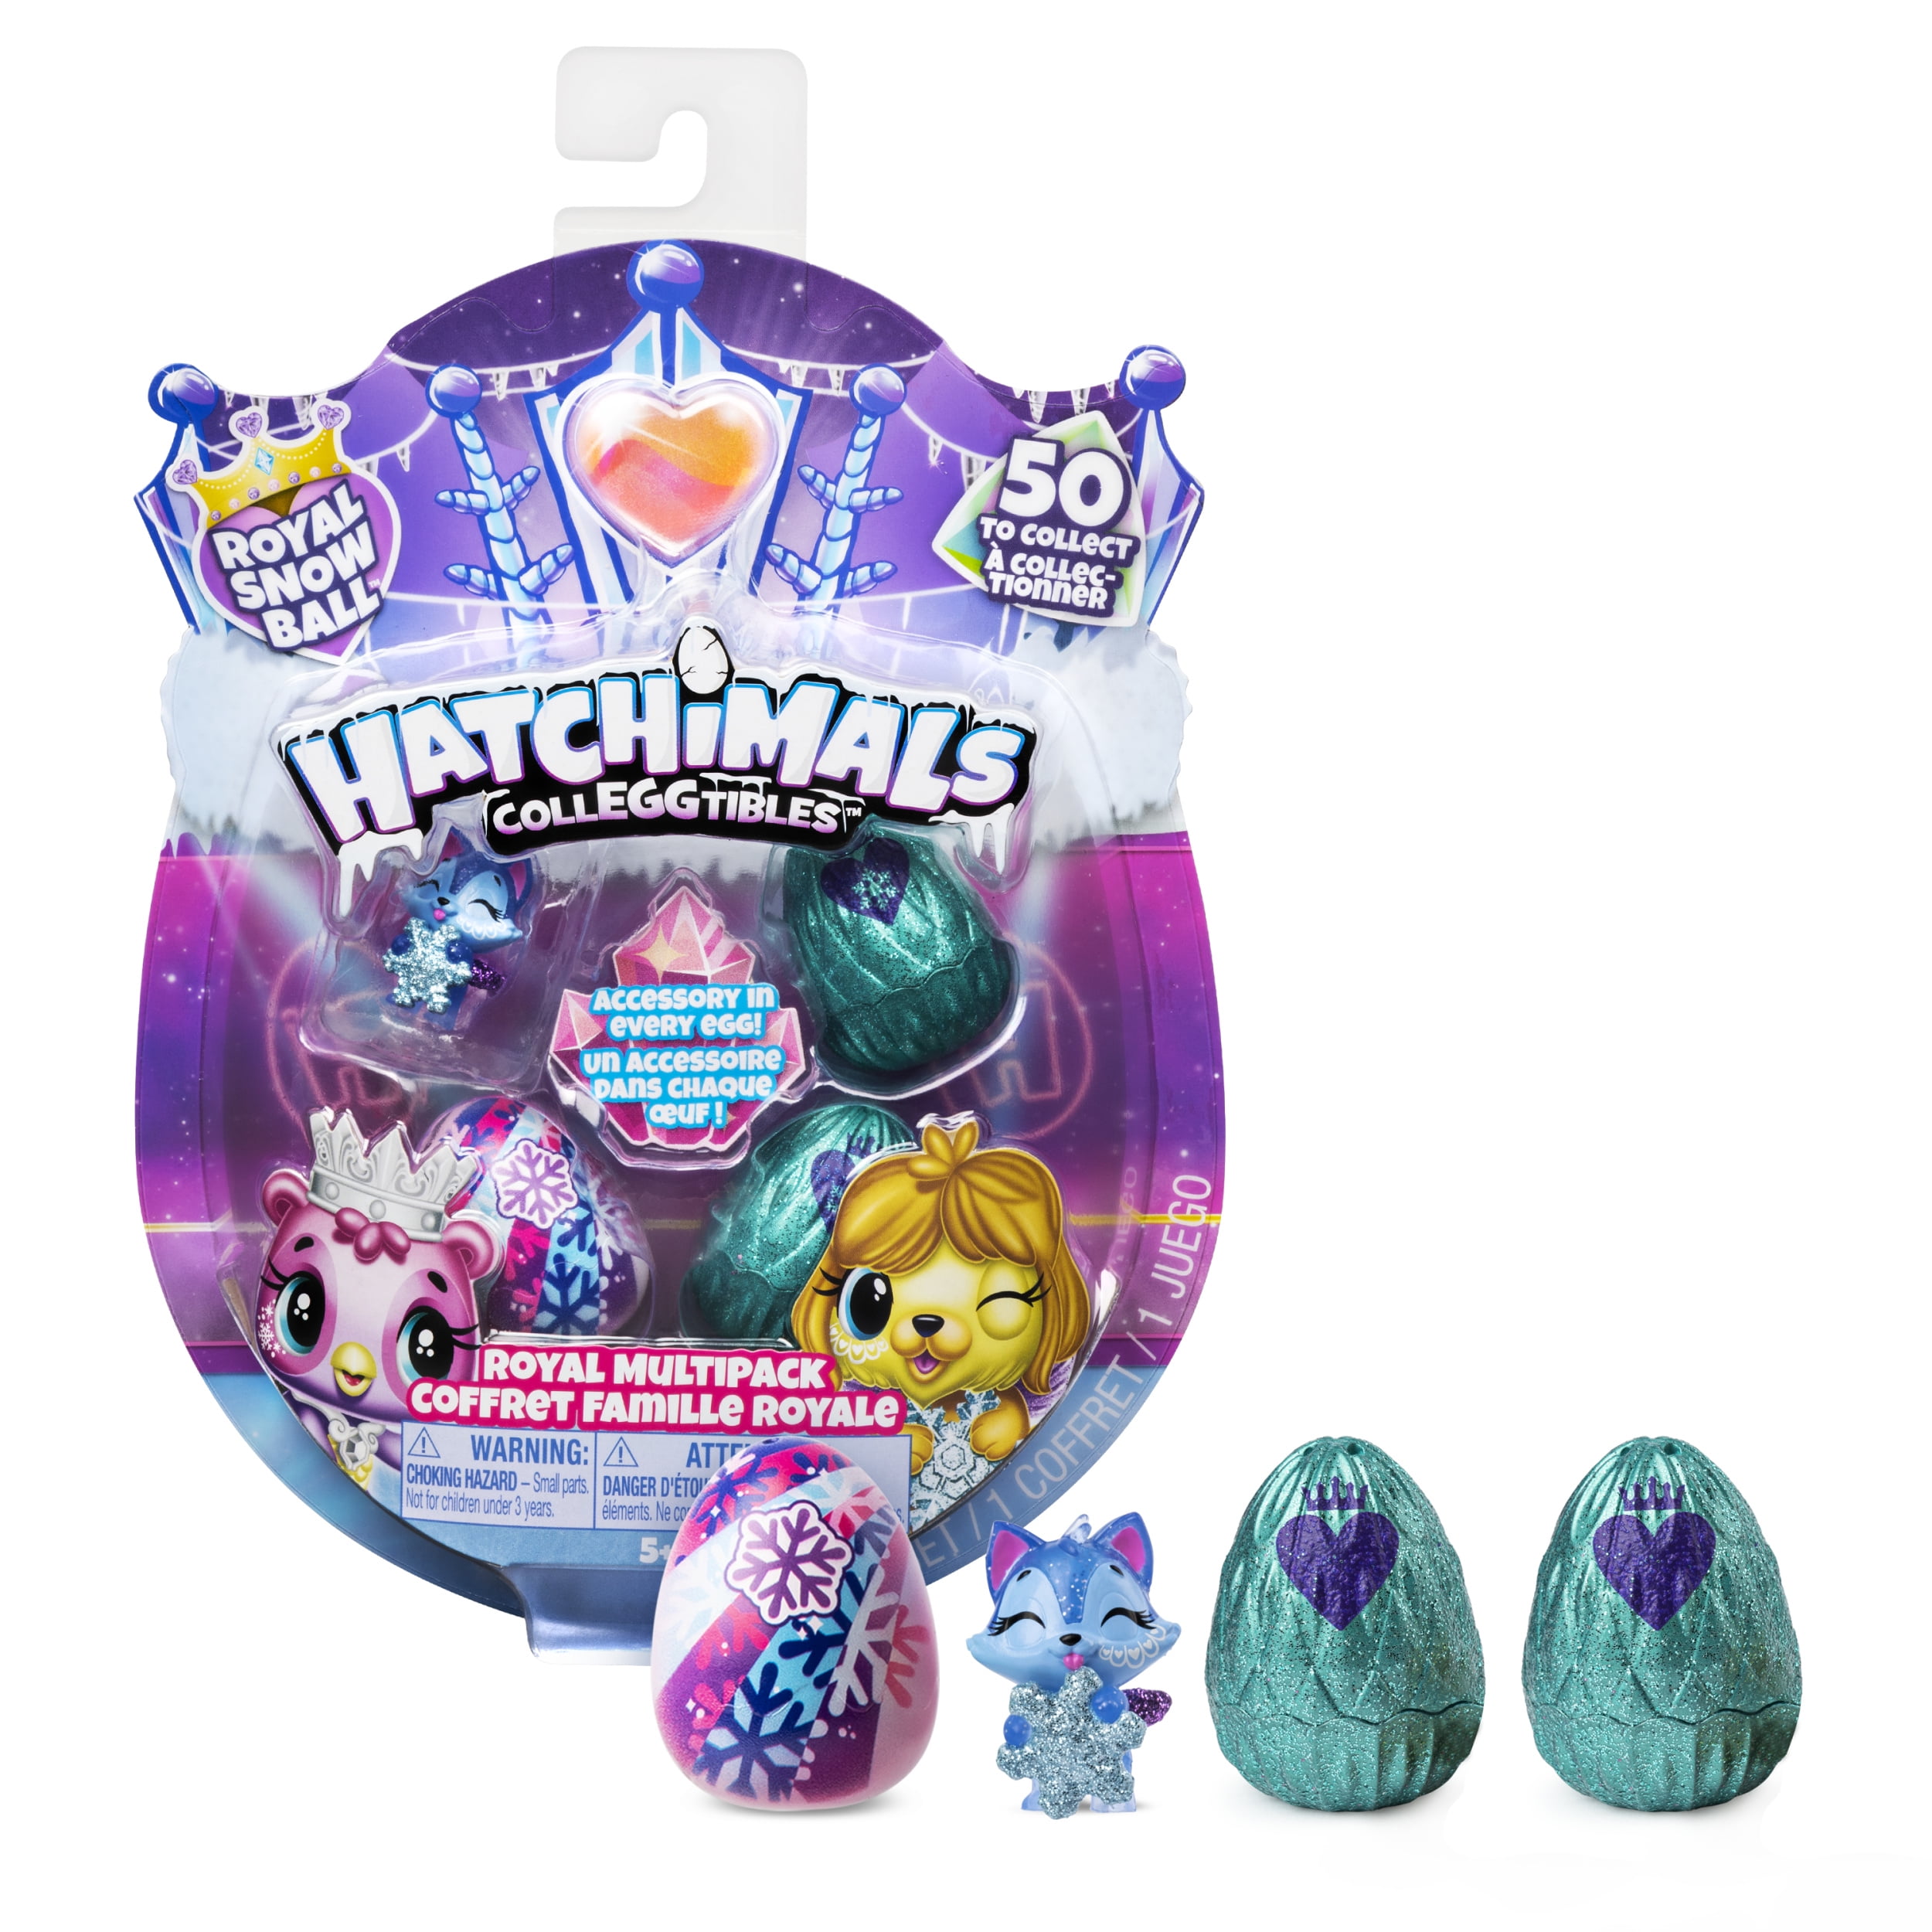 Hatchimals Colleggtibles Royal Multipack With 4 Hatchimals And